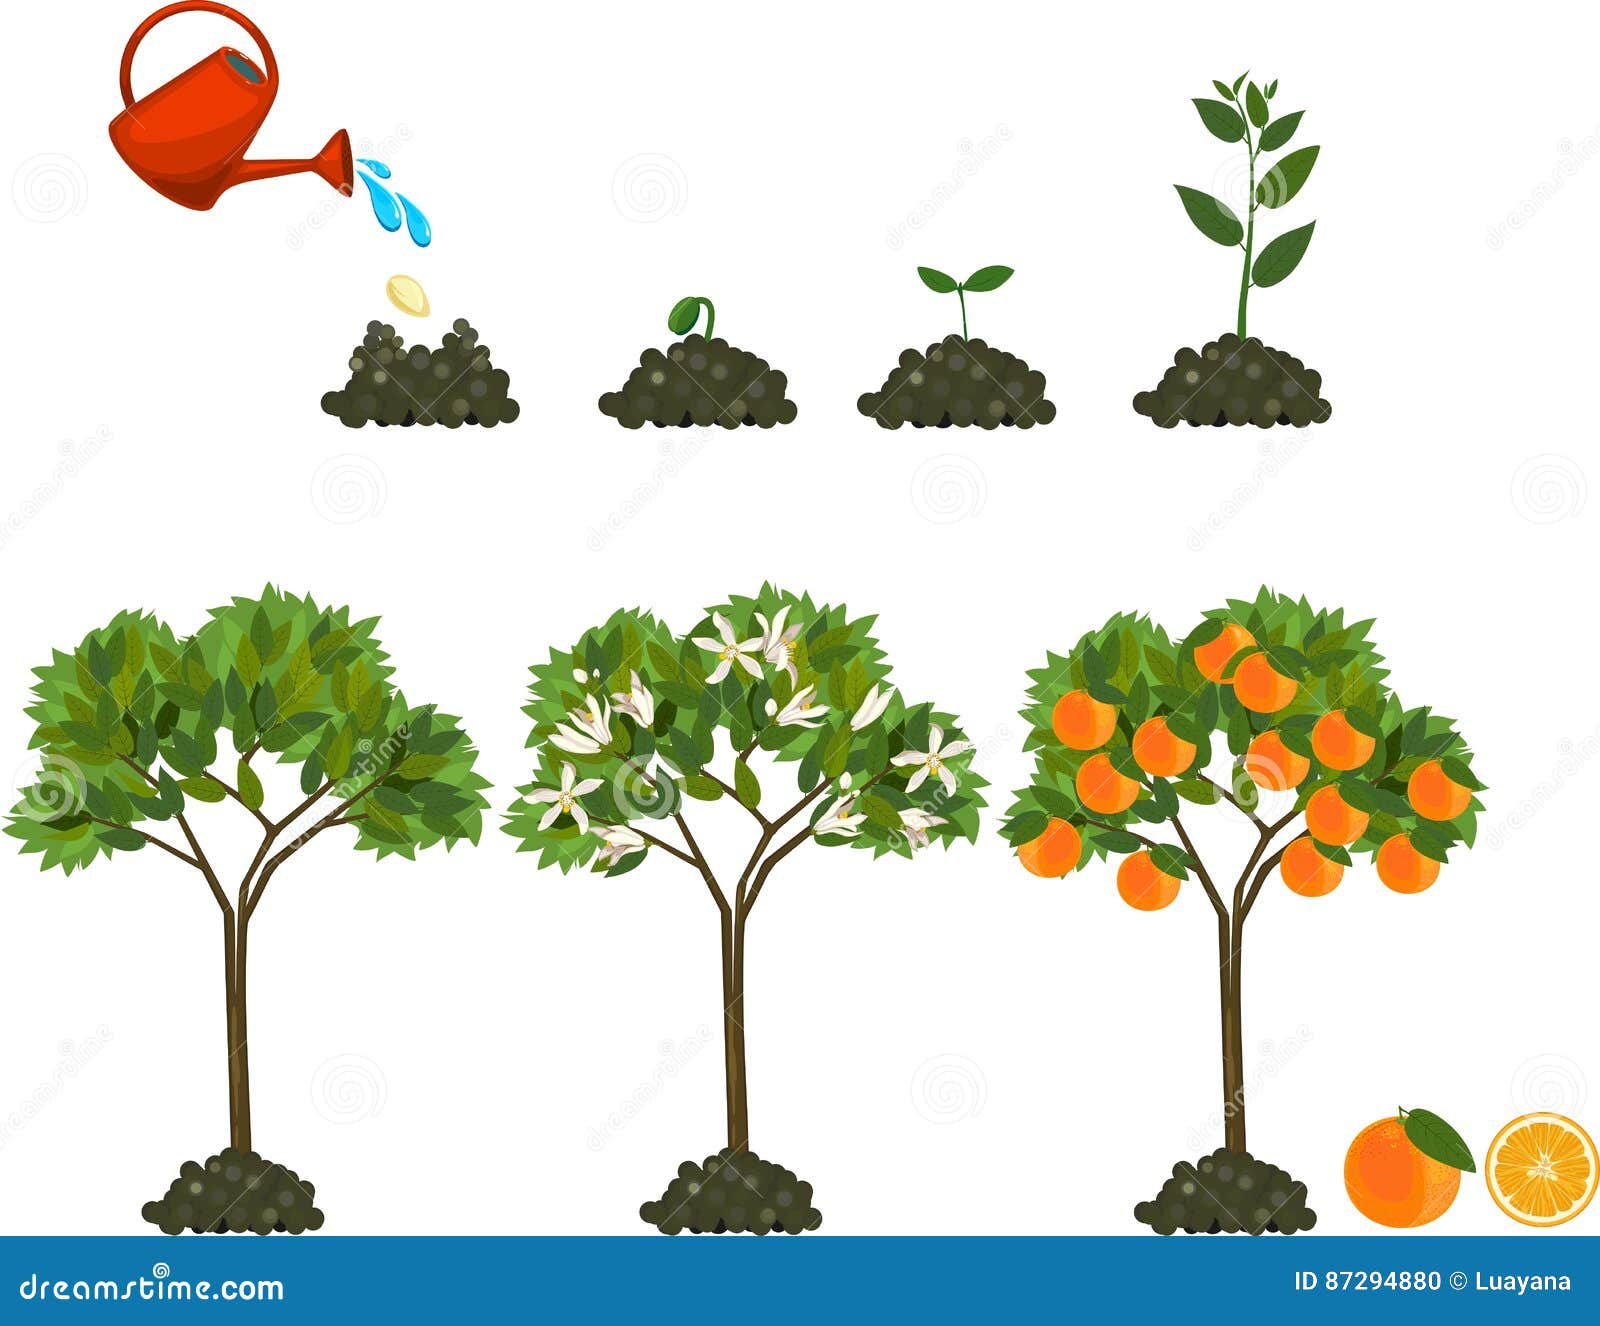 Plant Growing From Seed To Orange  Tree  Life Cycle  Plant 